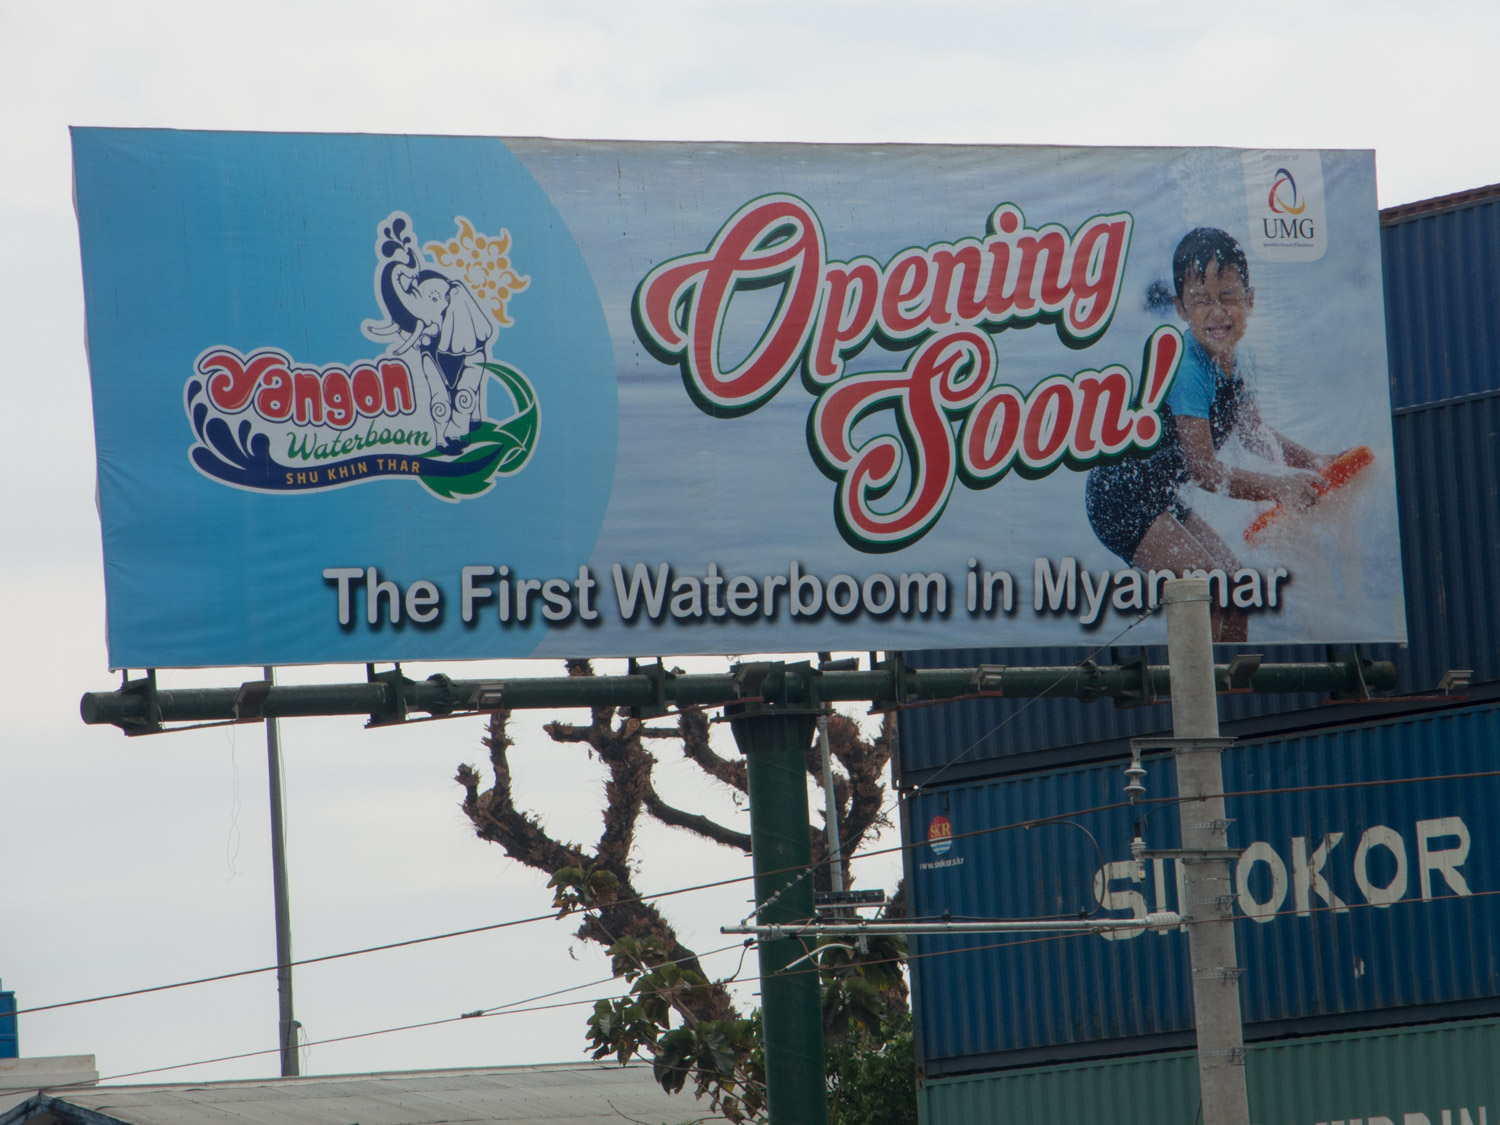 Do you know how long Myanmar has been waiting for a waterboom? Do you know what a waterboom is? No, me neither.